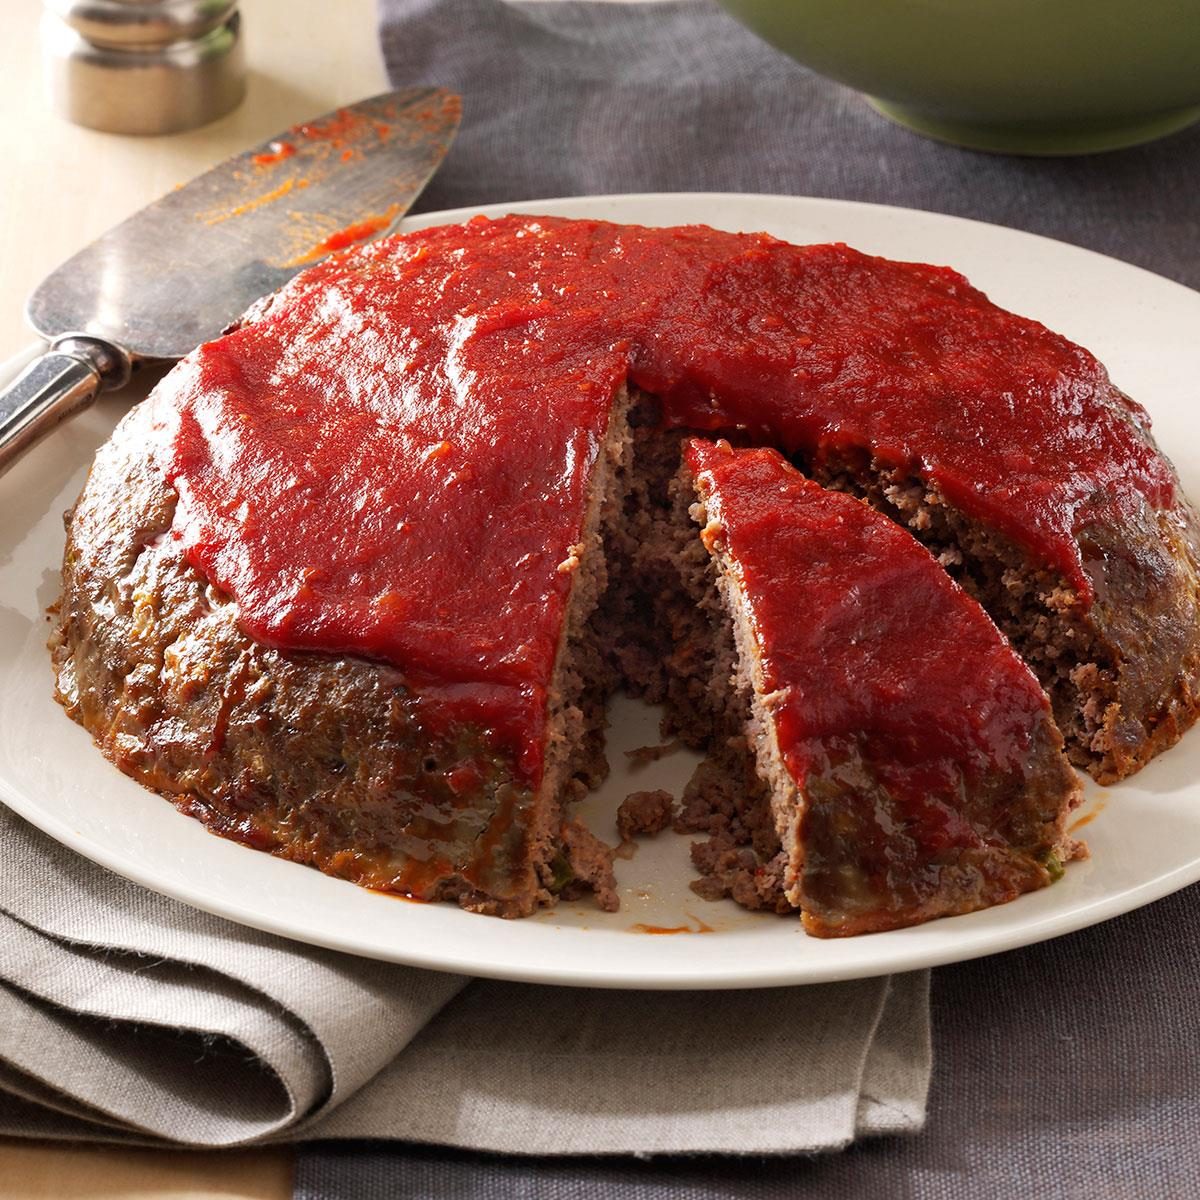 Meat Loaf with Chili Sauce Recipe: How to Make It